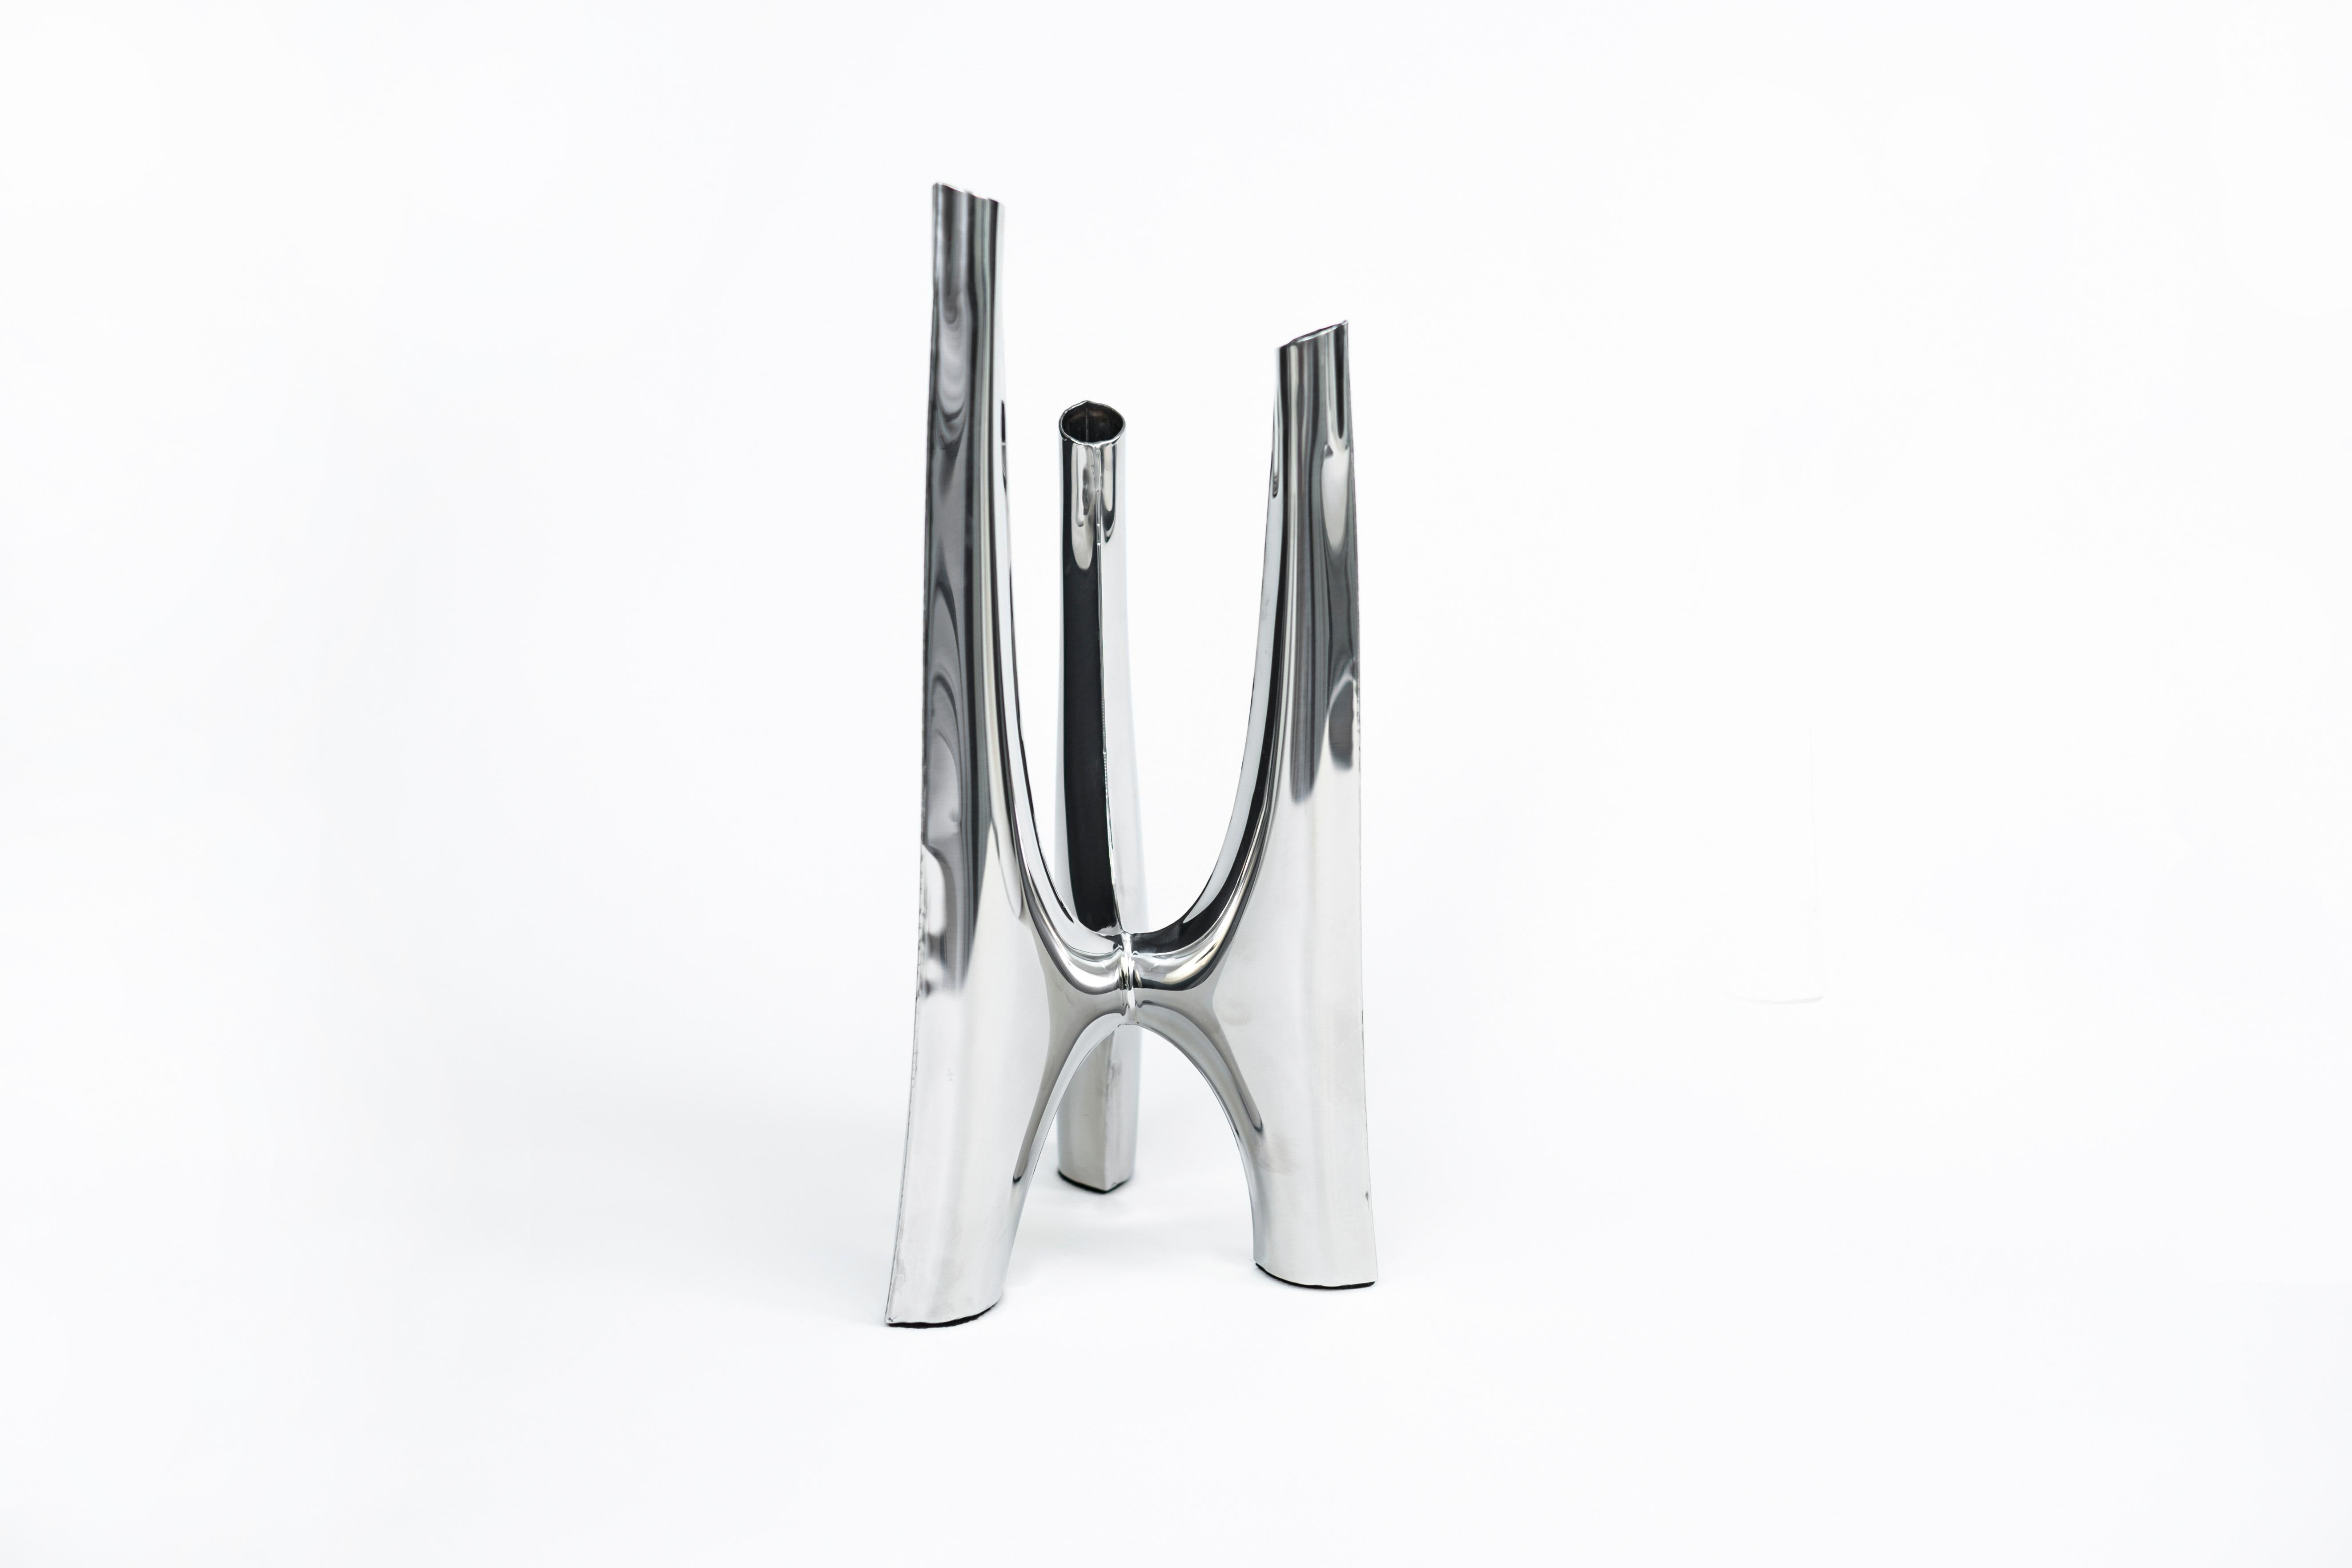 Triglav - Candelabrum, small
Original piece by Zieta, delivered with certificate. 

Polished stainless steel
Candles included

Measures: H 41 x 19 cm.